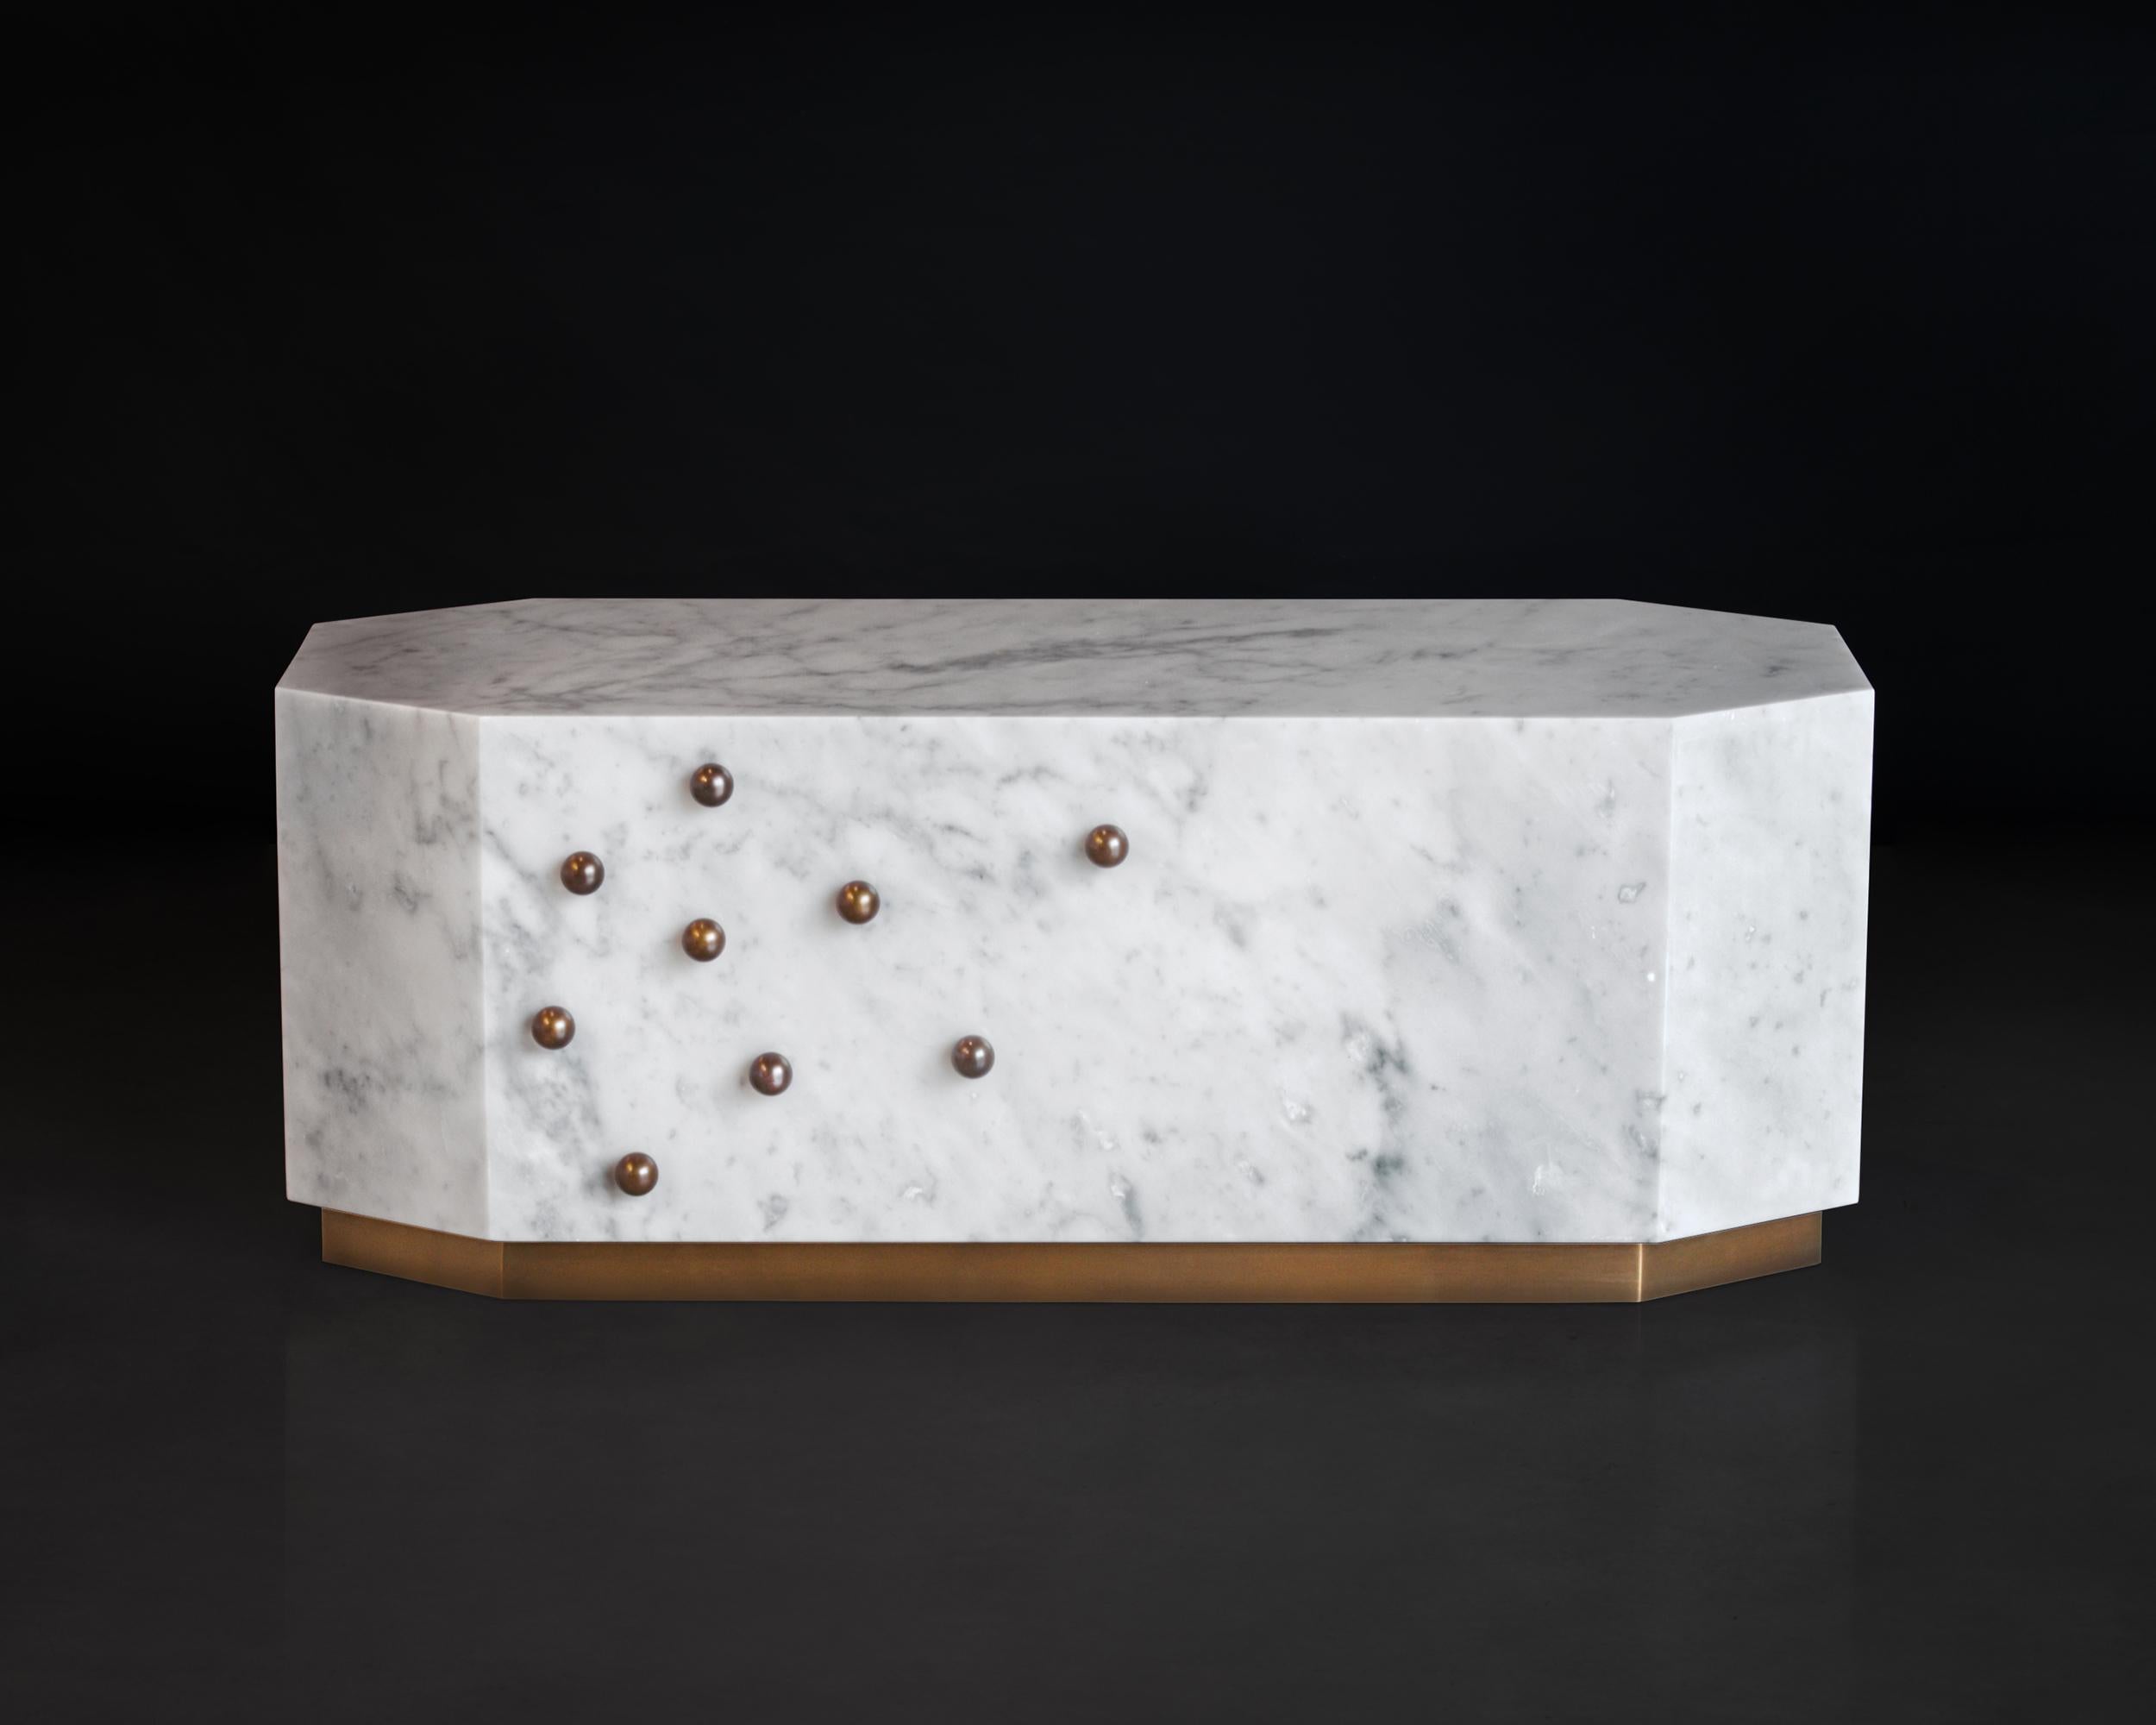 Coffee table made of a solid block of white Carrara marble from the finest quarries, with decorative small spheres and hand-welded base in light bronze finish brass. Made in our atelier in Florence, Italy.
Base and spheres available in different